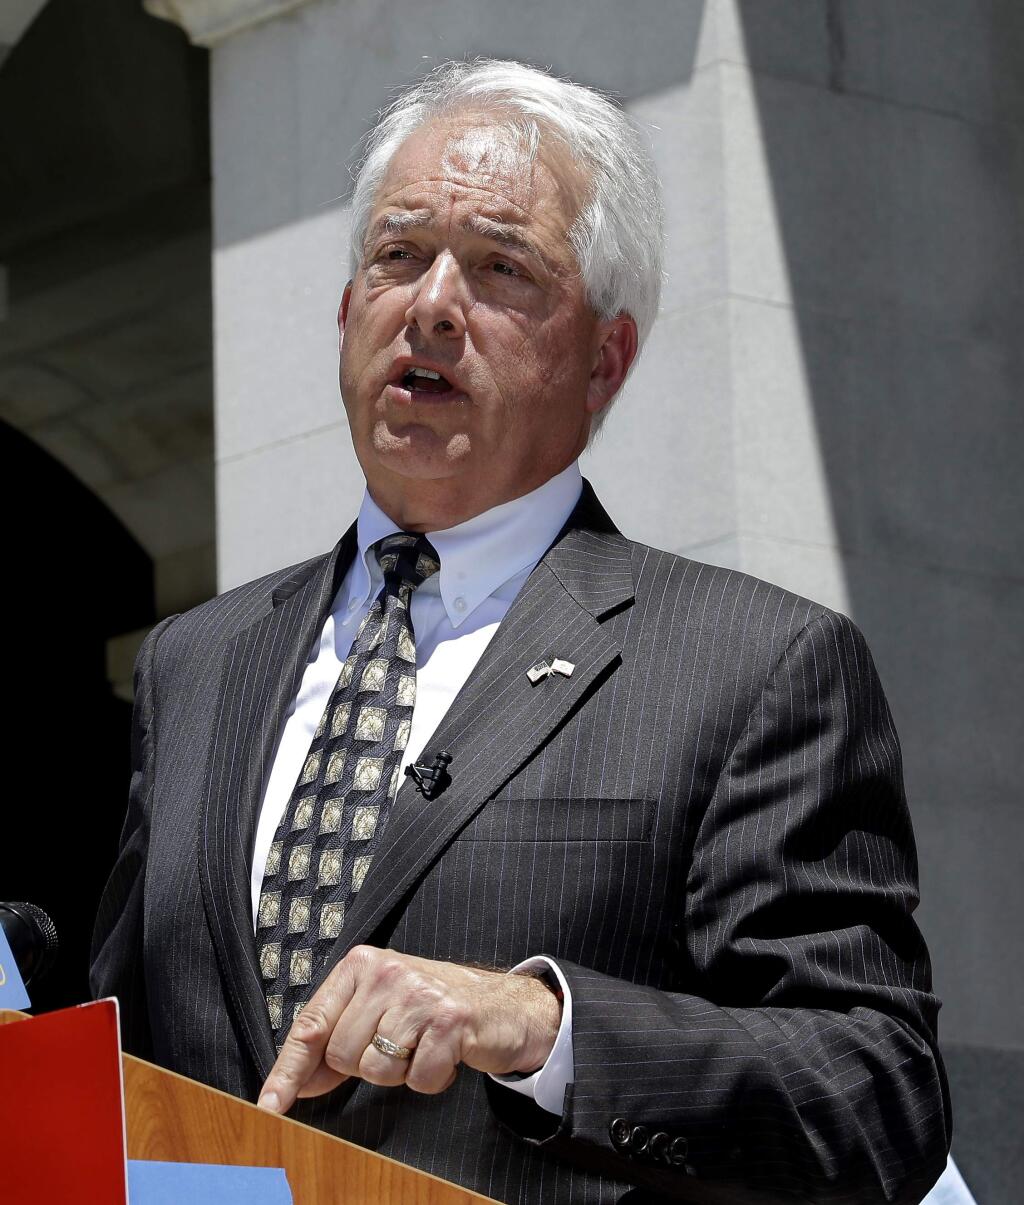 Republican gubernatorial candidate John Cox blasts a recent gas tax increase during a news conference Monday, June 18, 2018, in Sacramento, Calif. Cox is the chairman of a campaign to repeal the gas tax increase and faces Democratic Lt. Gov. Gavin Newsom in November. (AP Photo/Rich Pedroncelli)